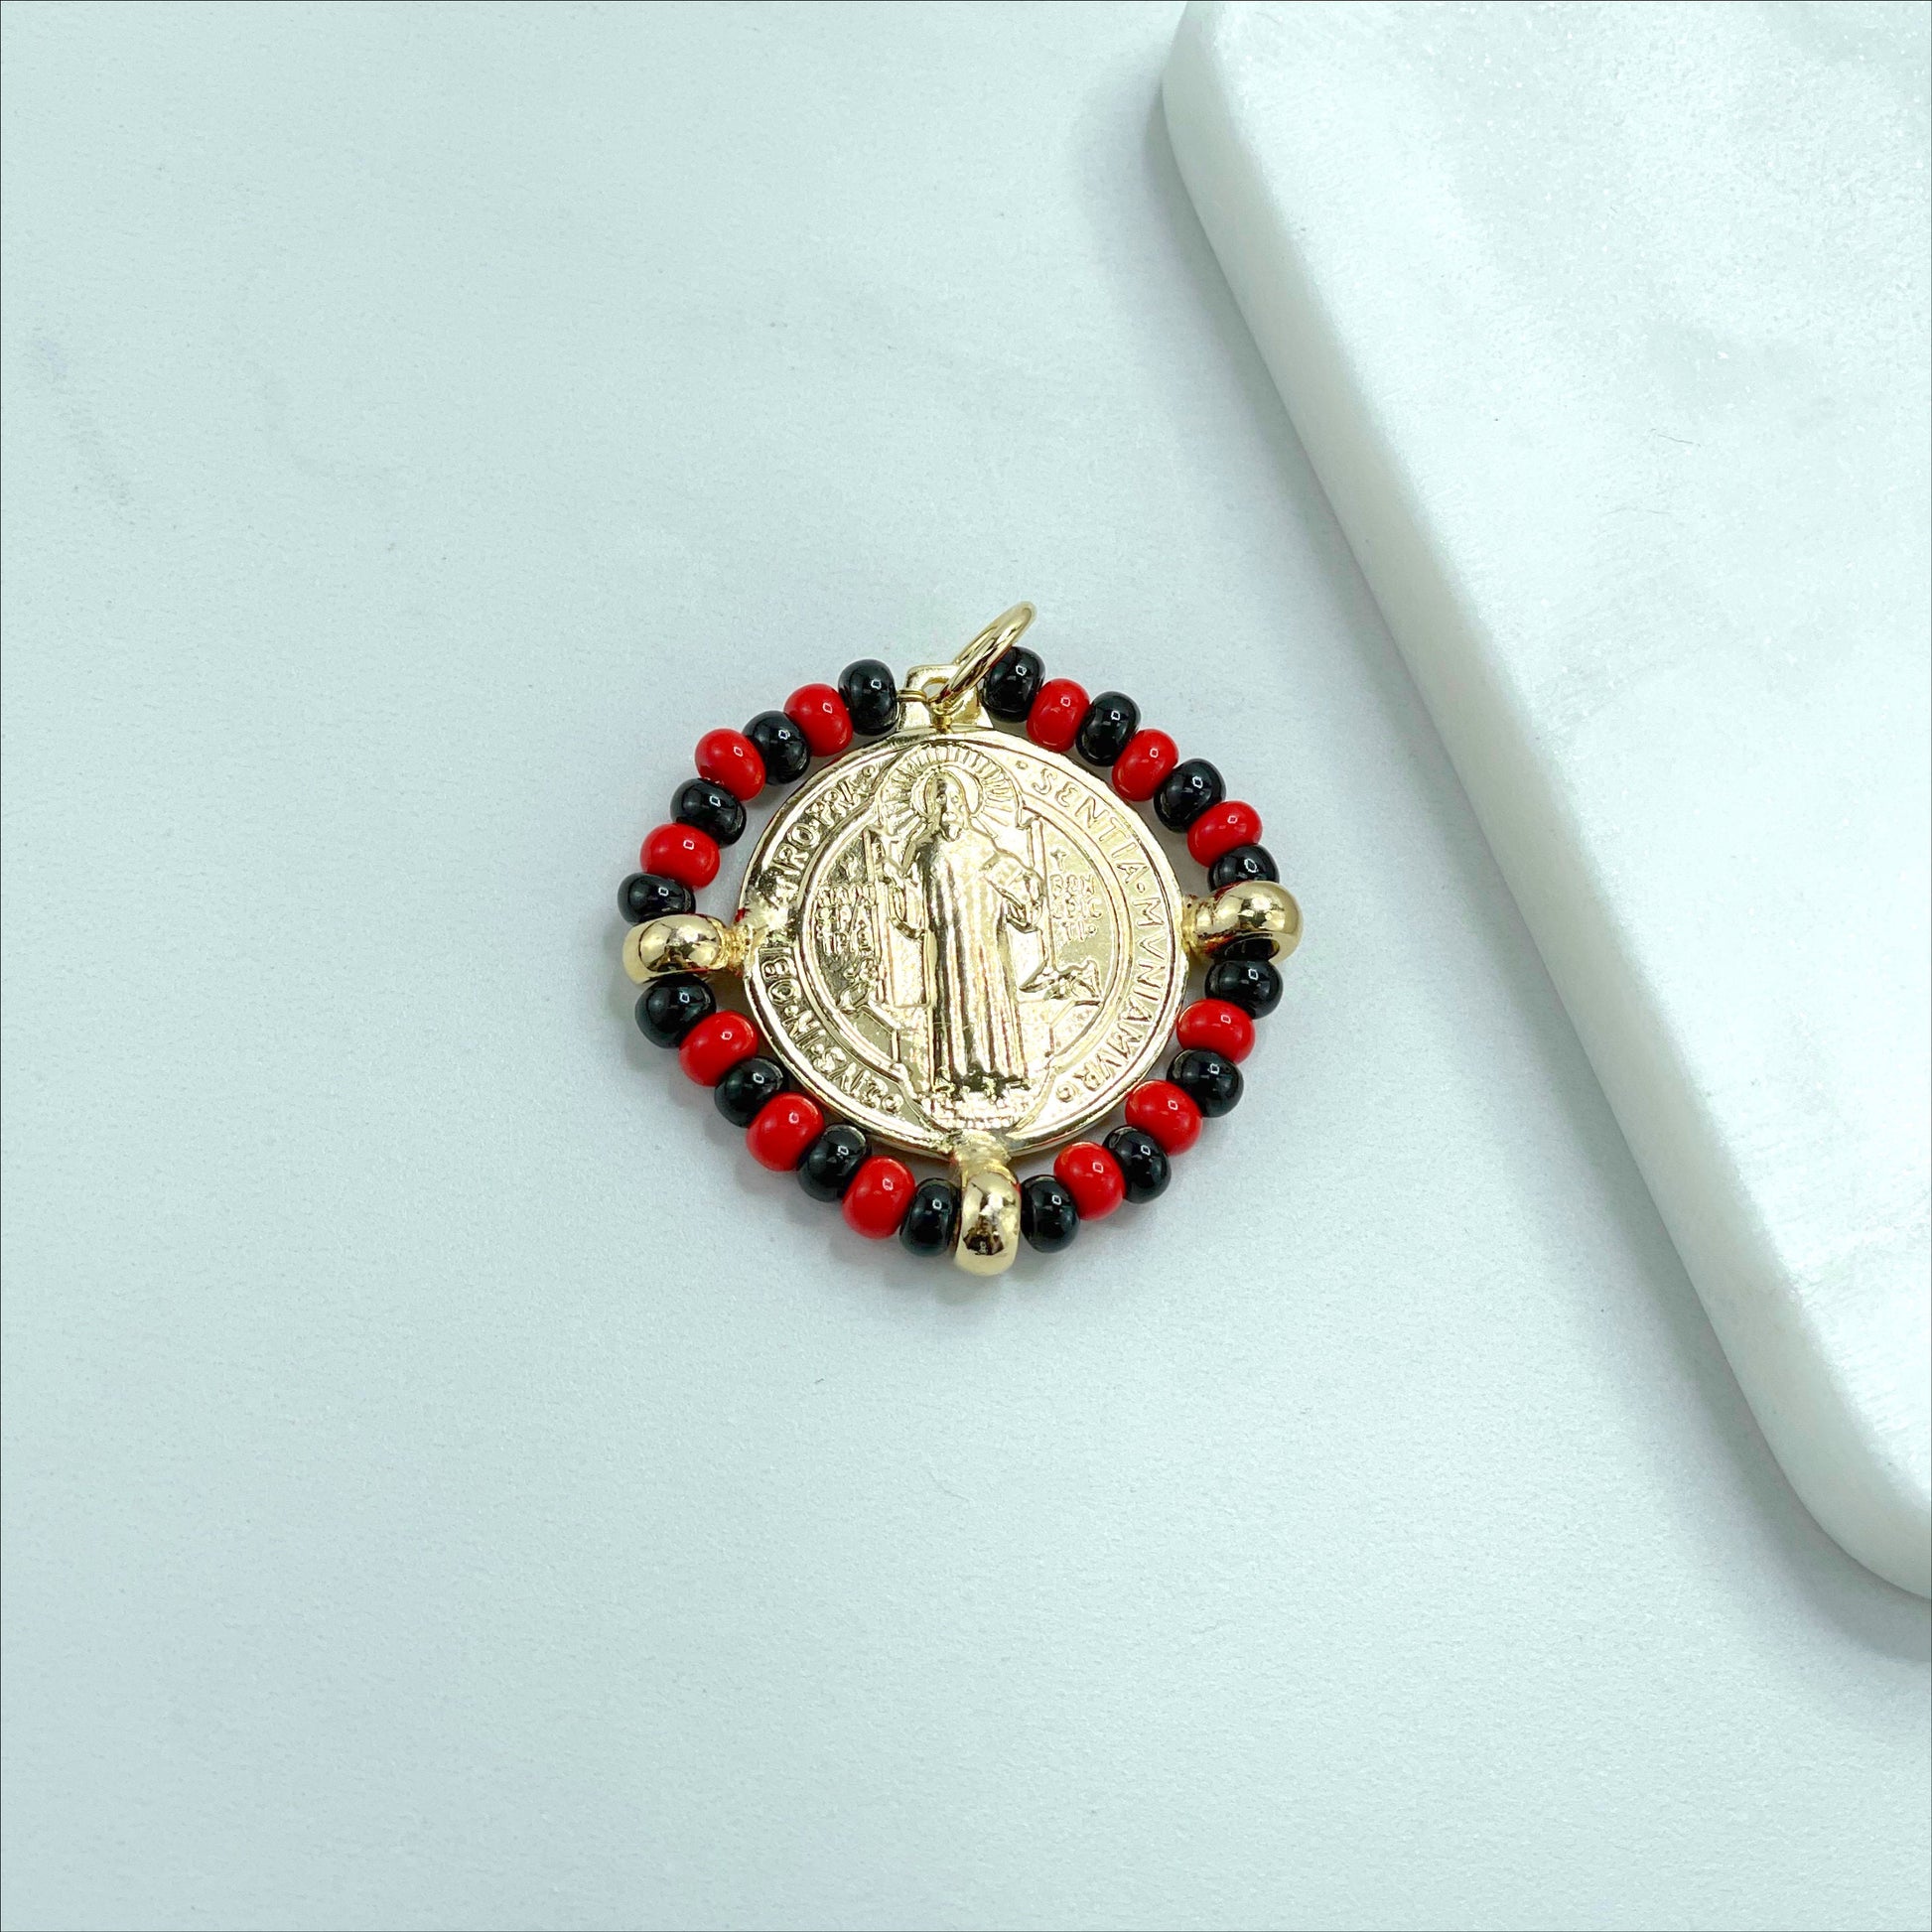 18k Gold Filled San Benito Coin, Black & Red Beads, 2 Sided Round Pendant Charms, Reversible San Benito, Wholesale Jewelry Making Supplies